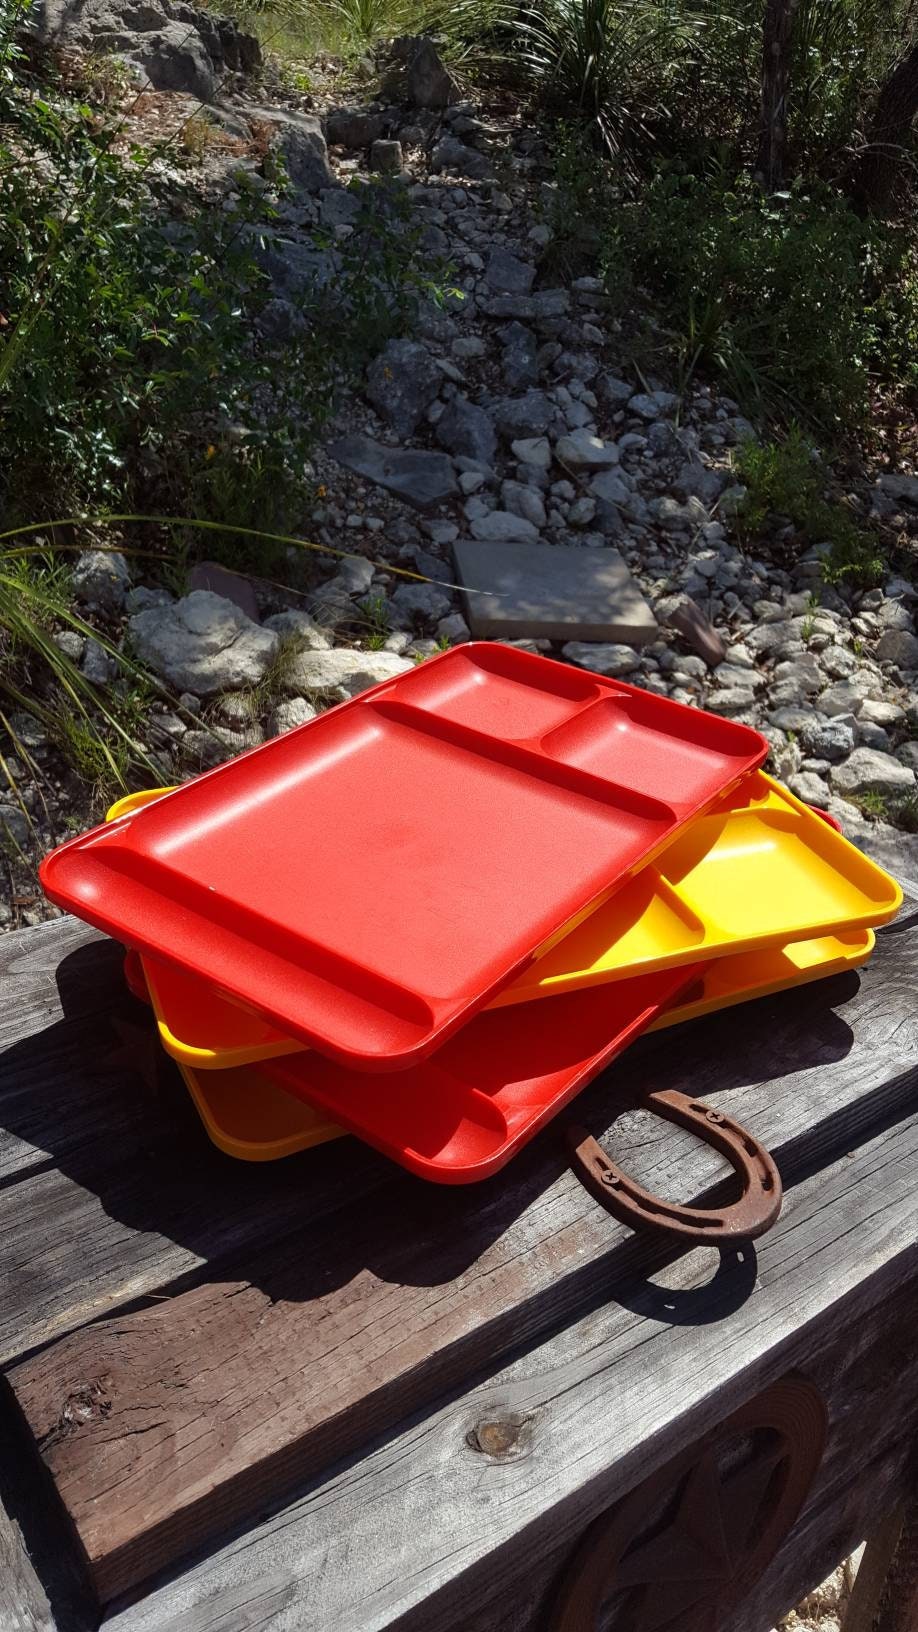 Vintage Tupperware. Red Divided Storage Container With 